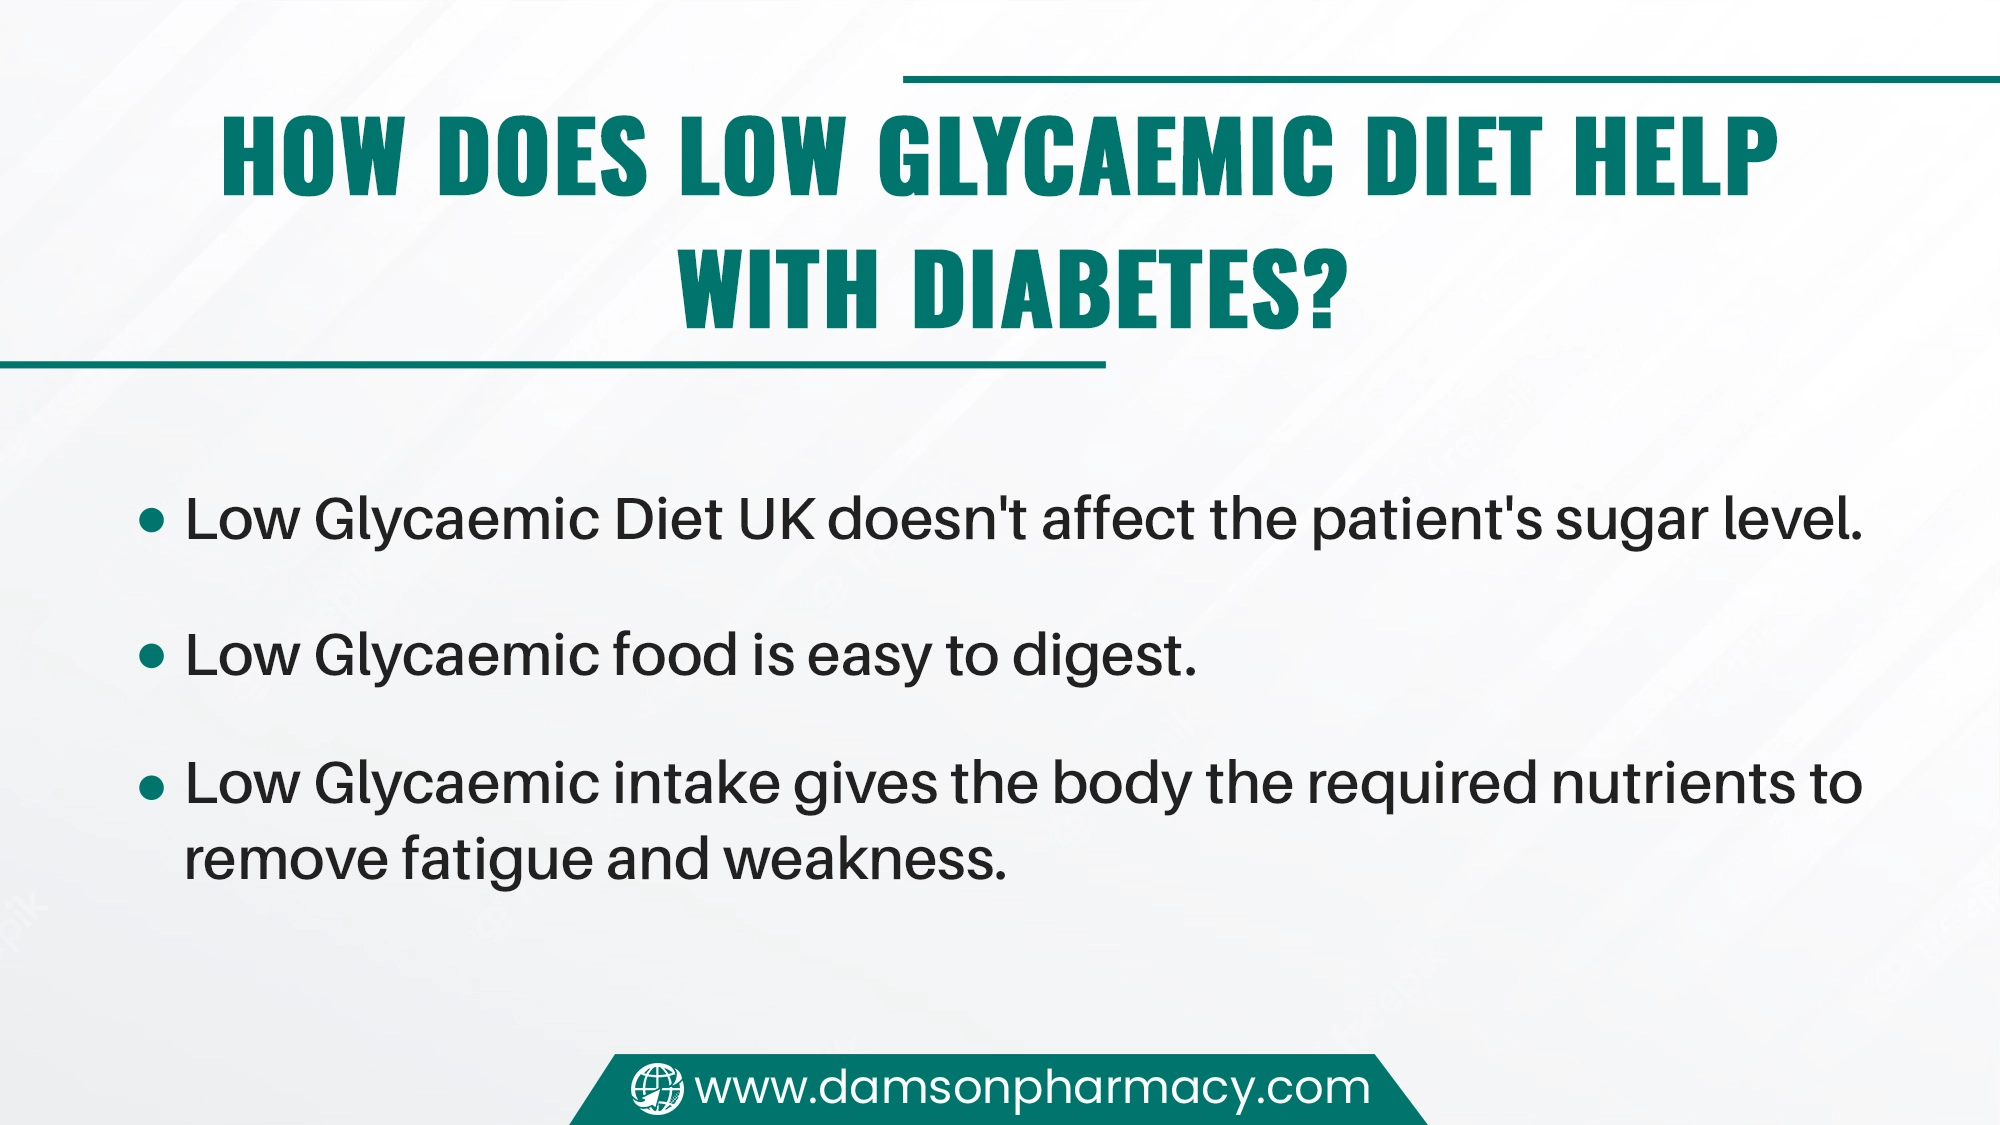 How Does Low Glycaemic Diet Help with Diabetes UK